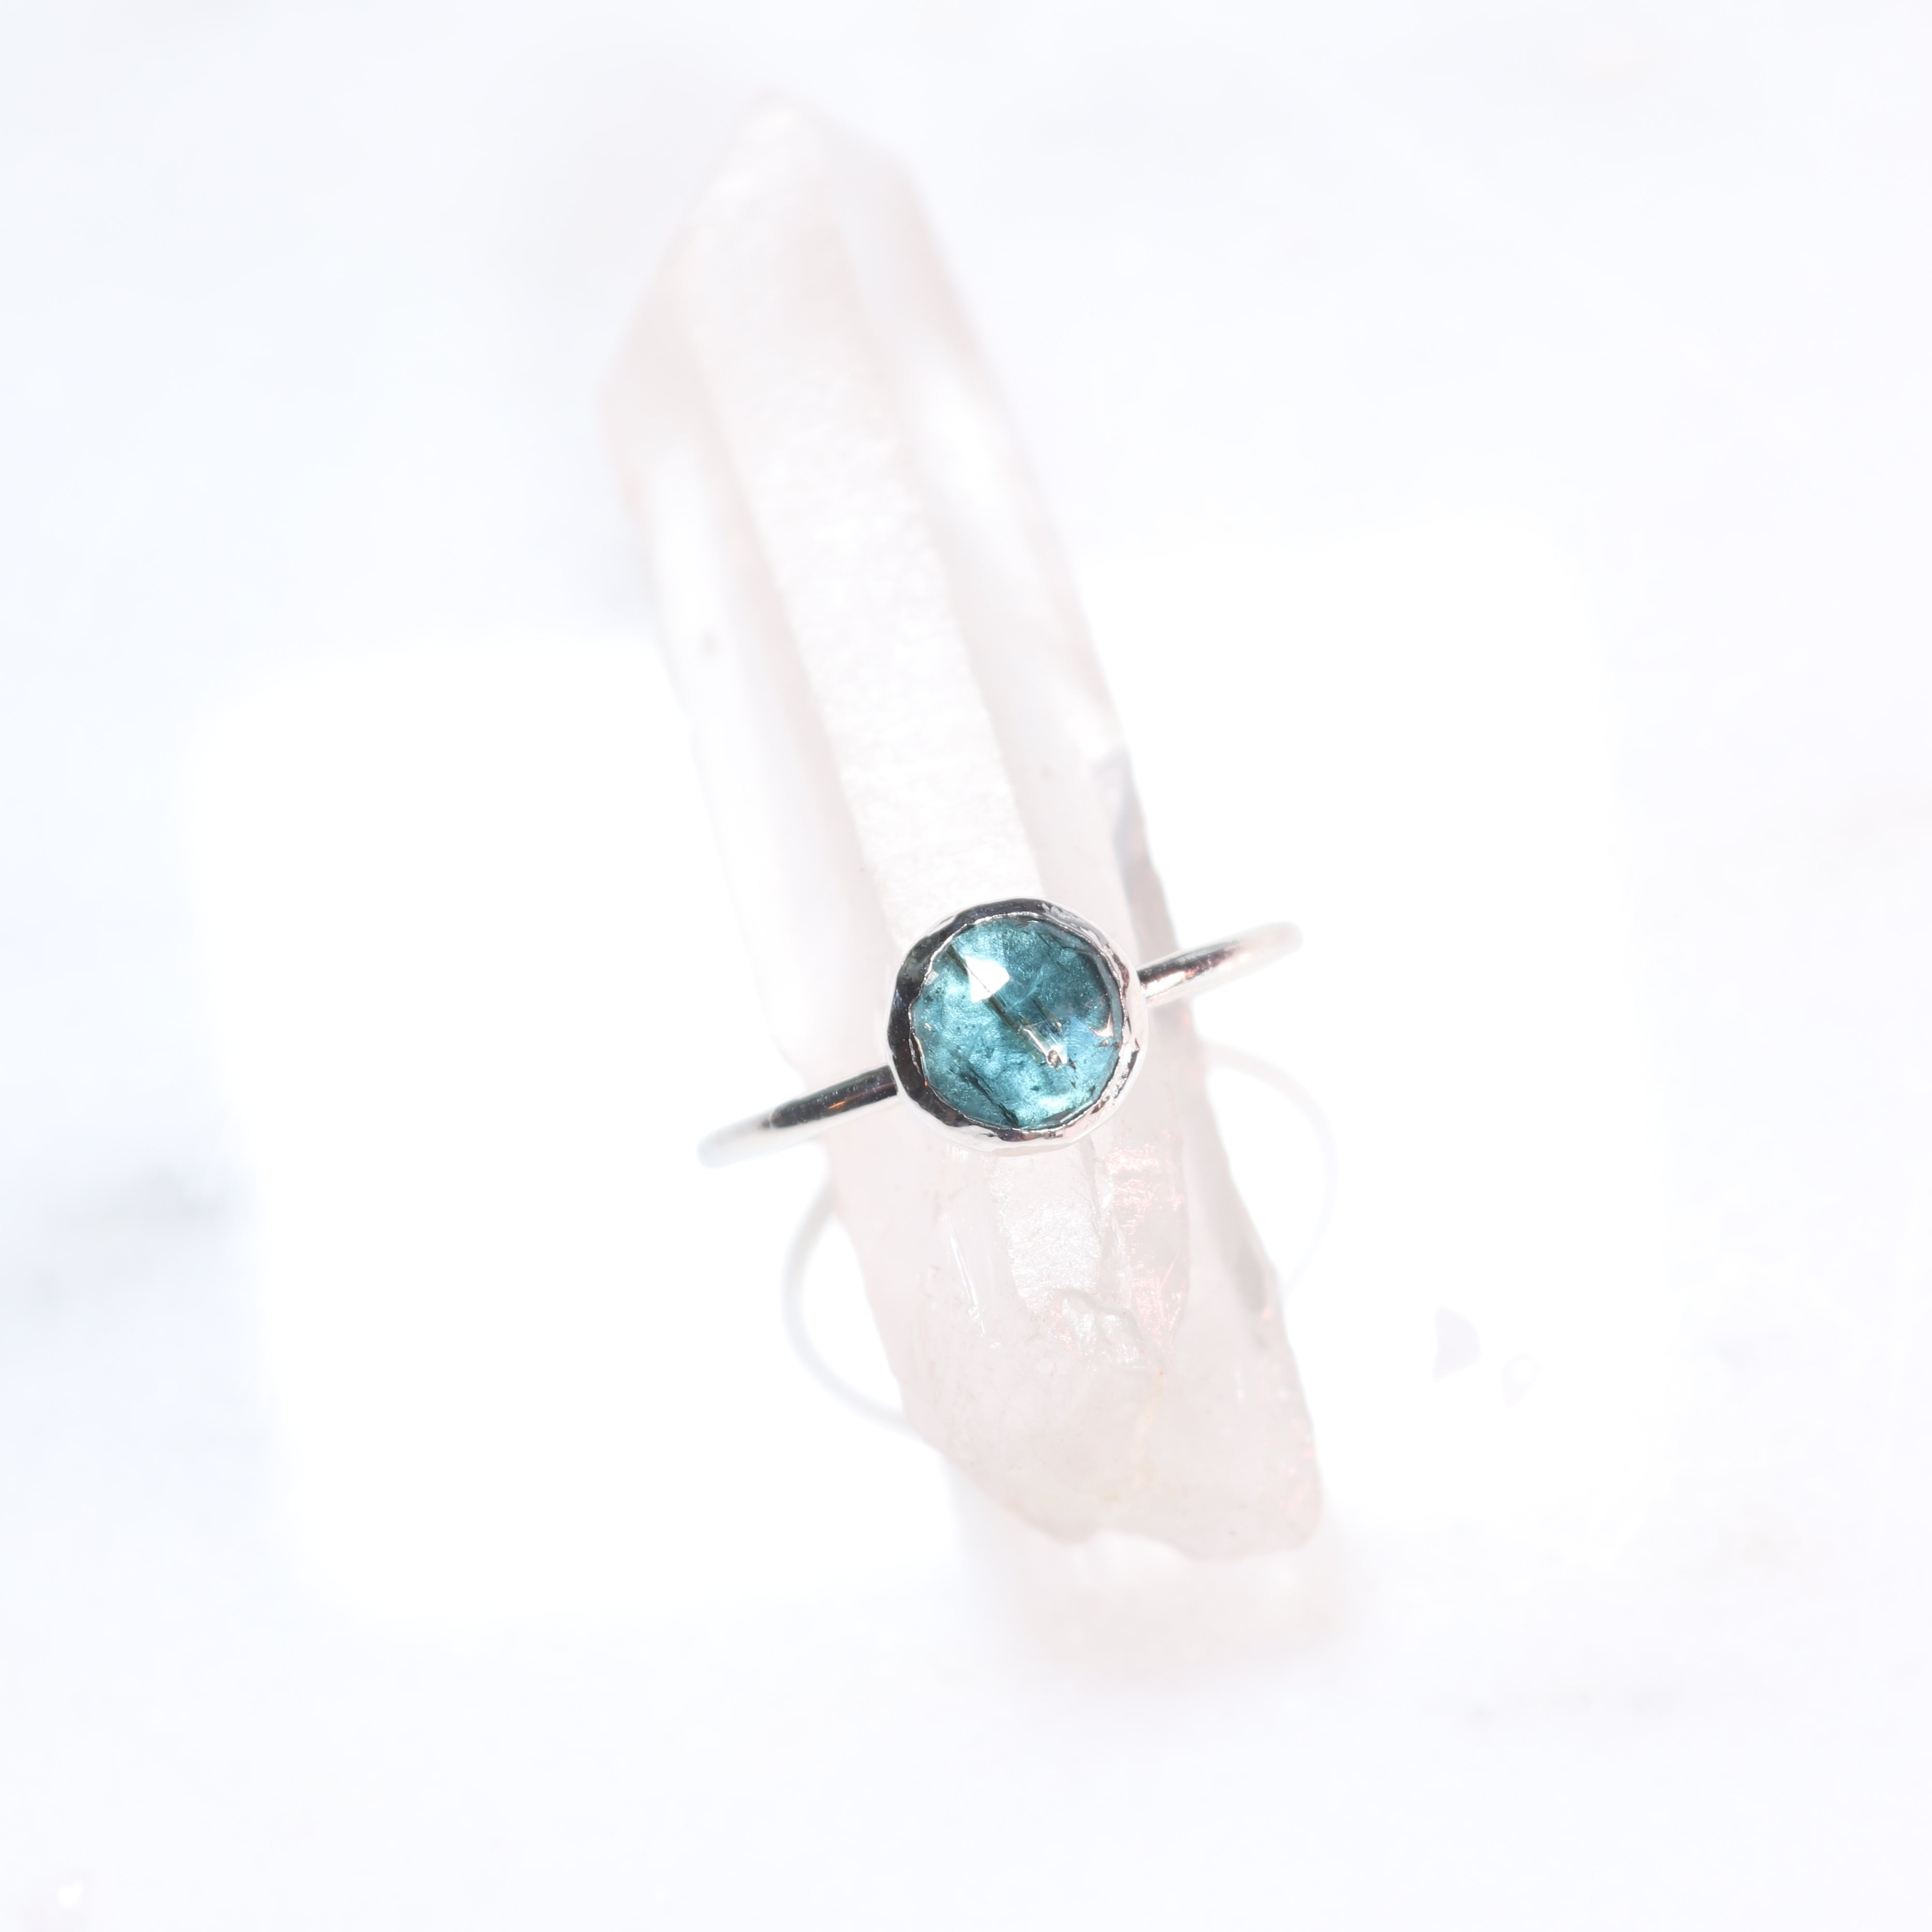 Blue Green Tourmaline Stone Ring in Sterling Silver